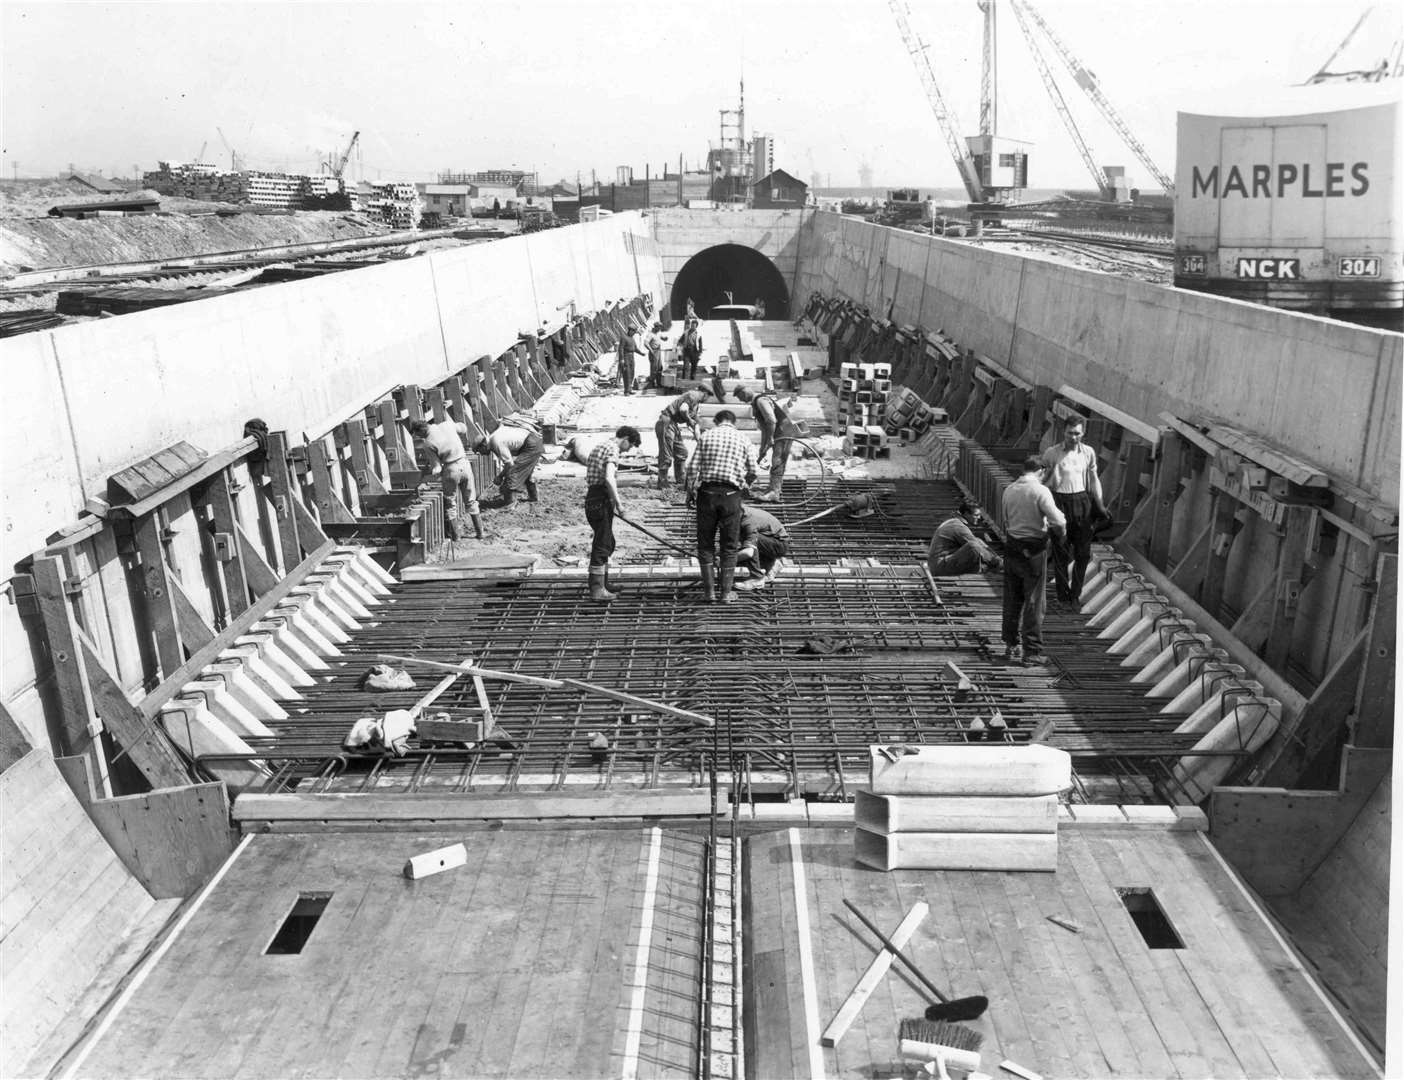 Dartford Tunnel: The tunnel pictured under construction during the early stages of building in 1959.